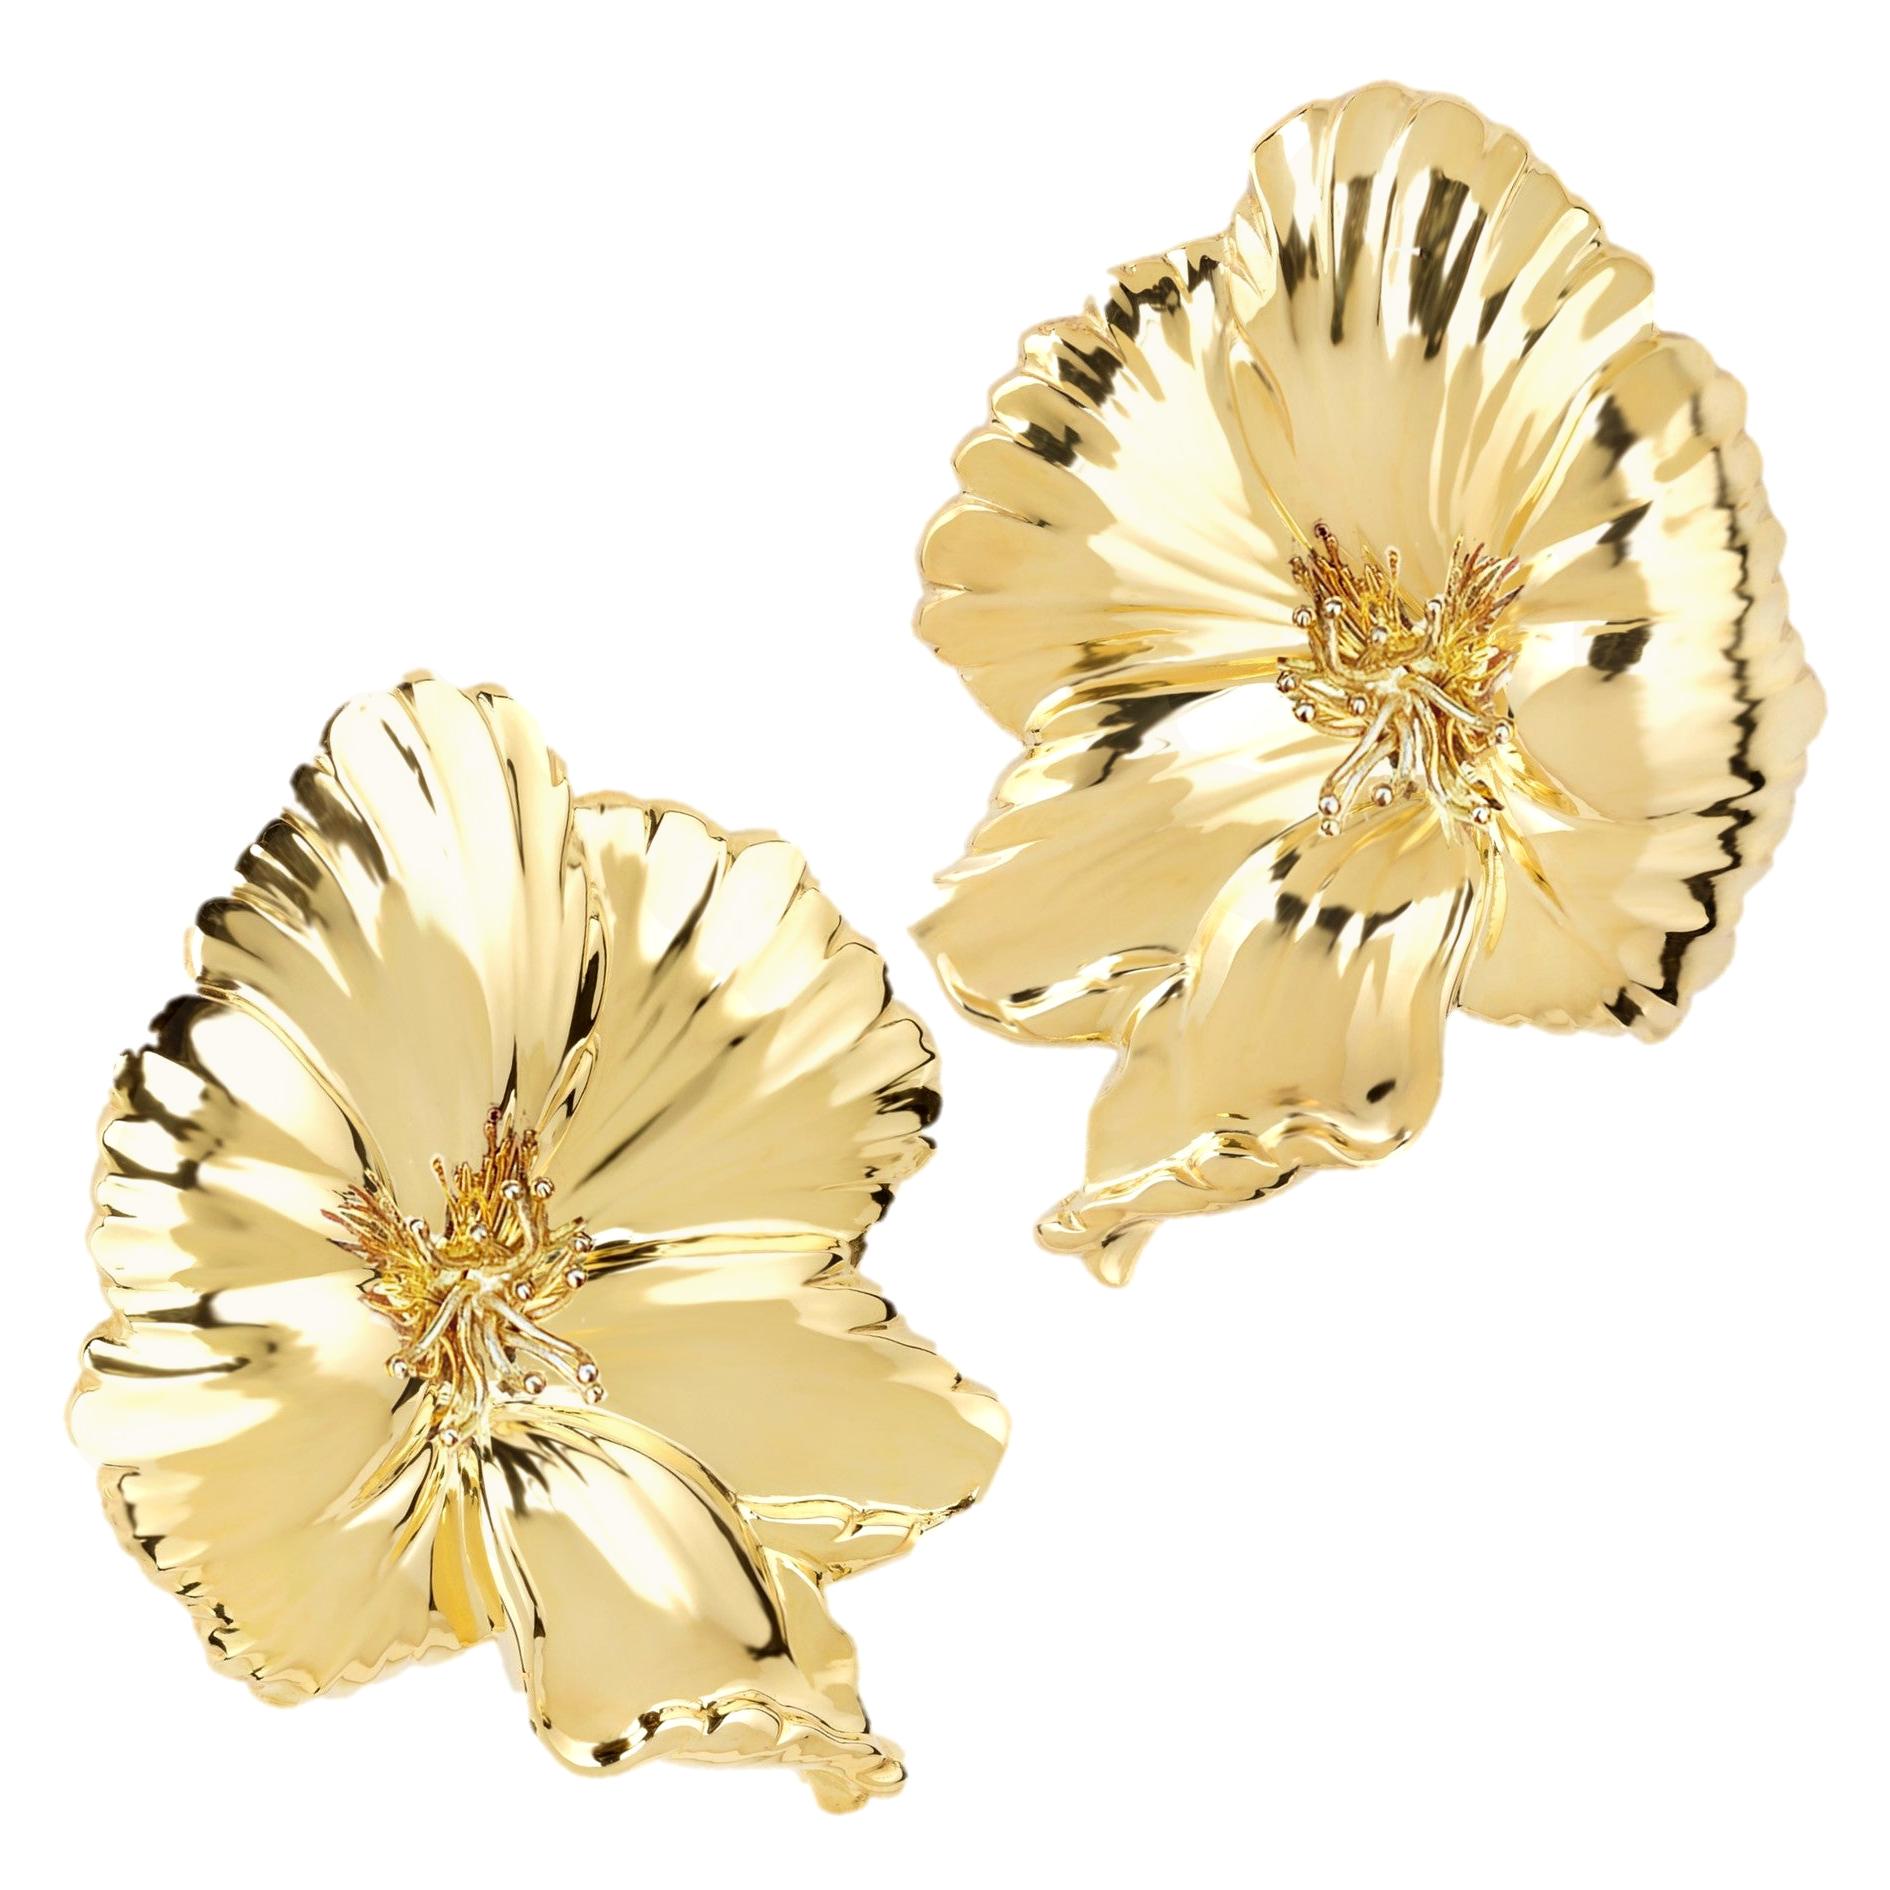 Rosior "Flower" Earrings Hand Chiseled in Yellow Gold